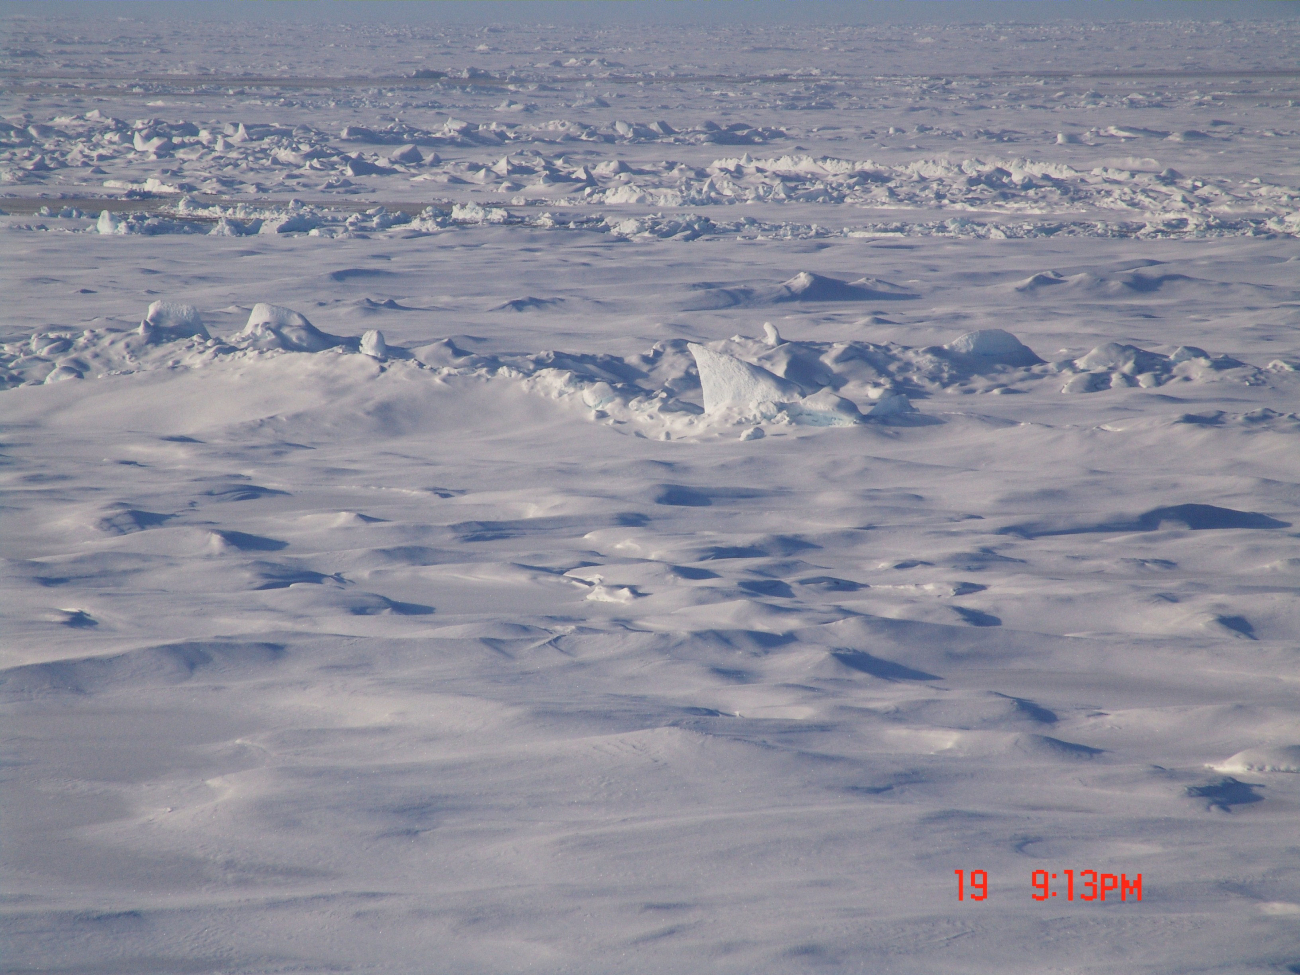 Hummocks, ice blocks, remnants of ridges, and remnants of melt pools can beseen in this image